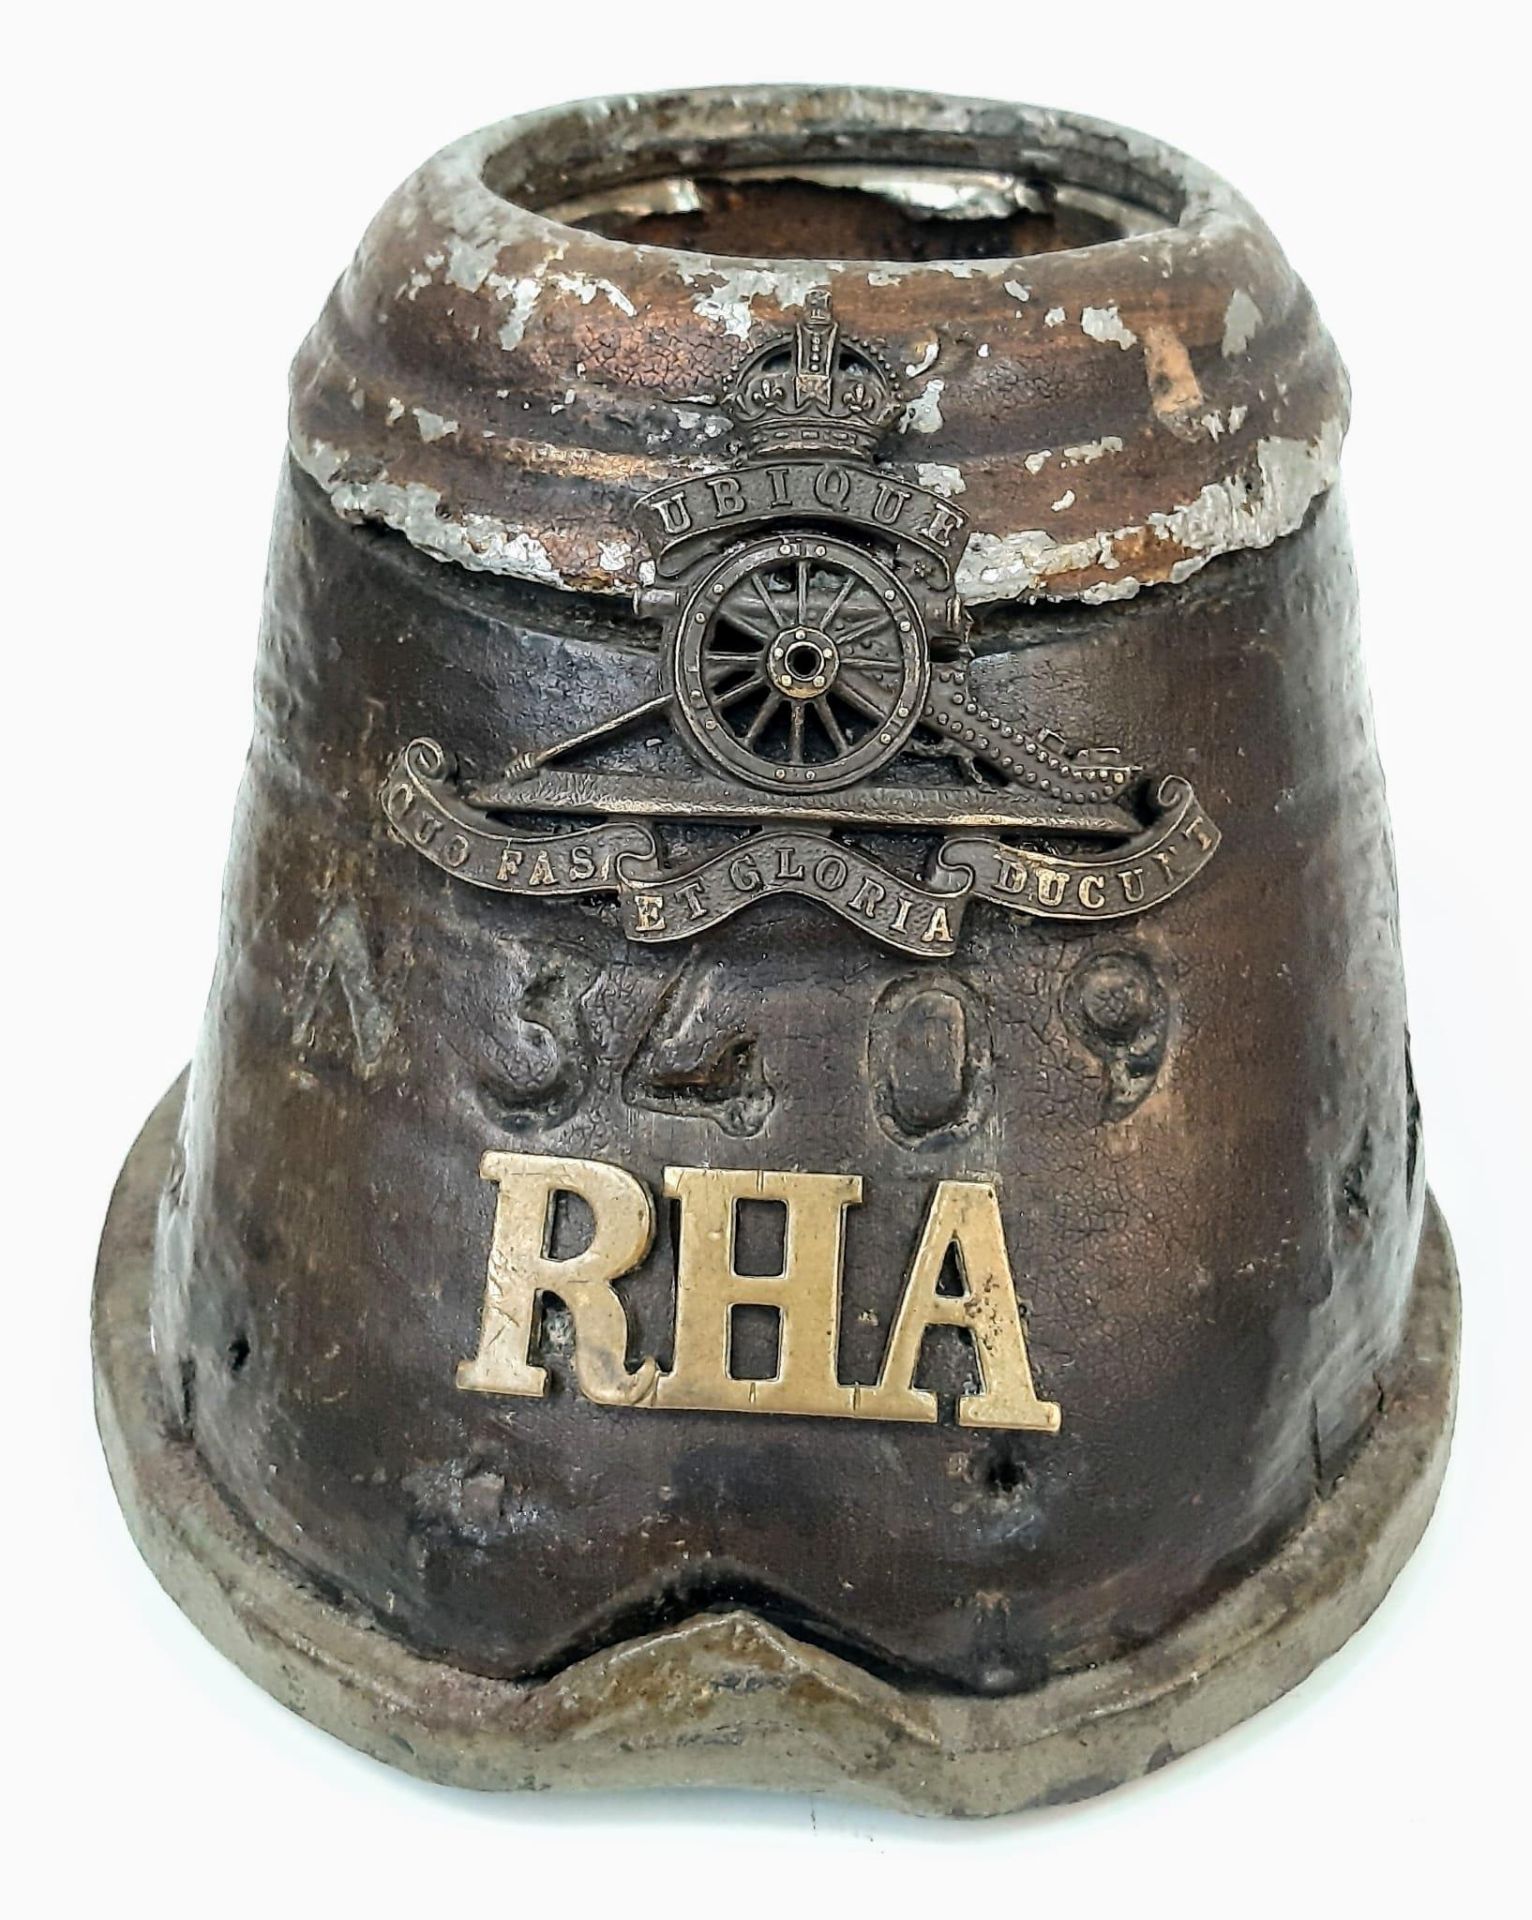 WW1 Trench Art Horse Hoof from a Horse in the Royal Horse Artillery during the First World War.